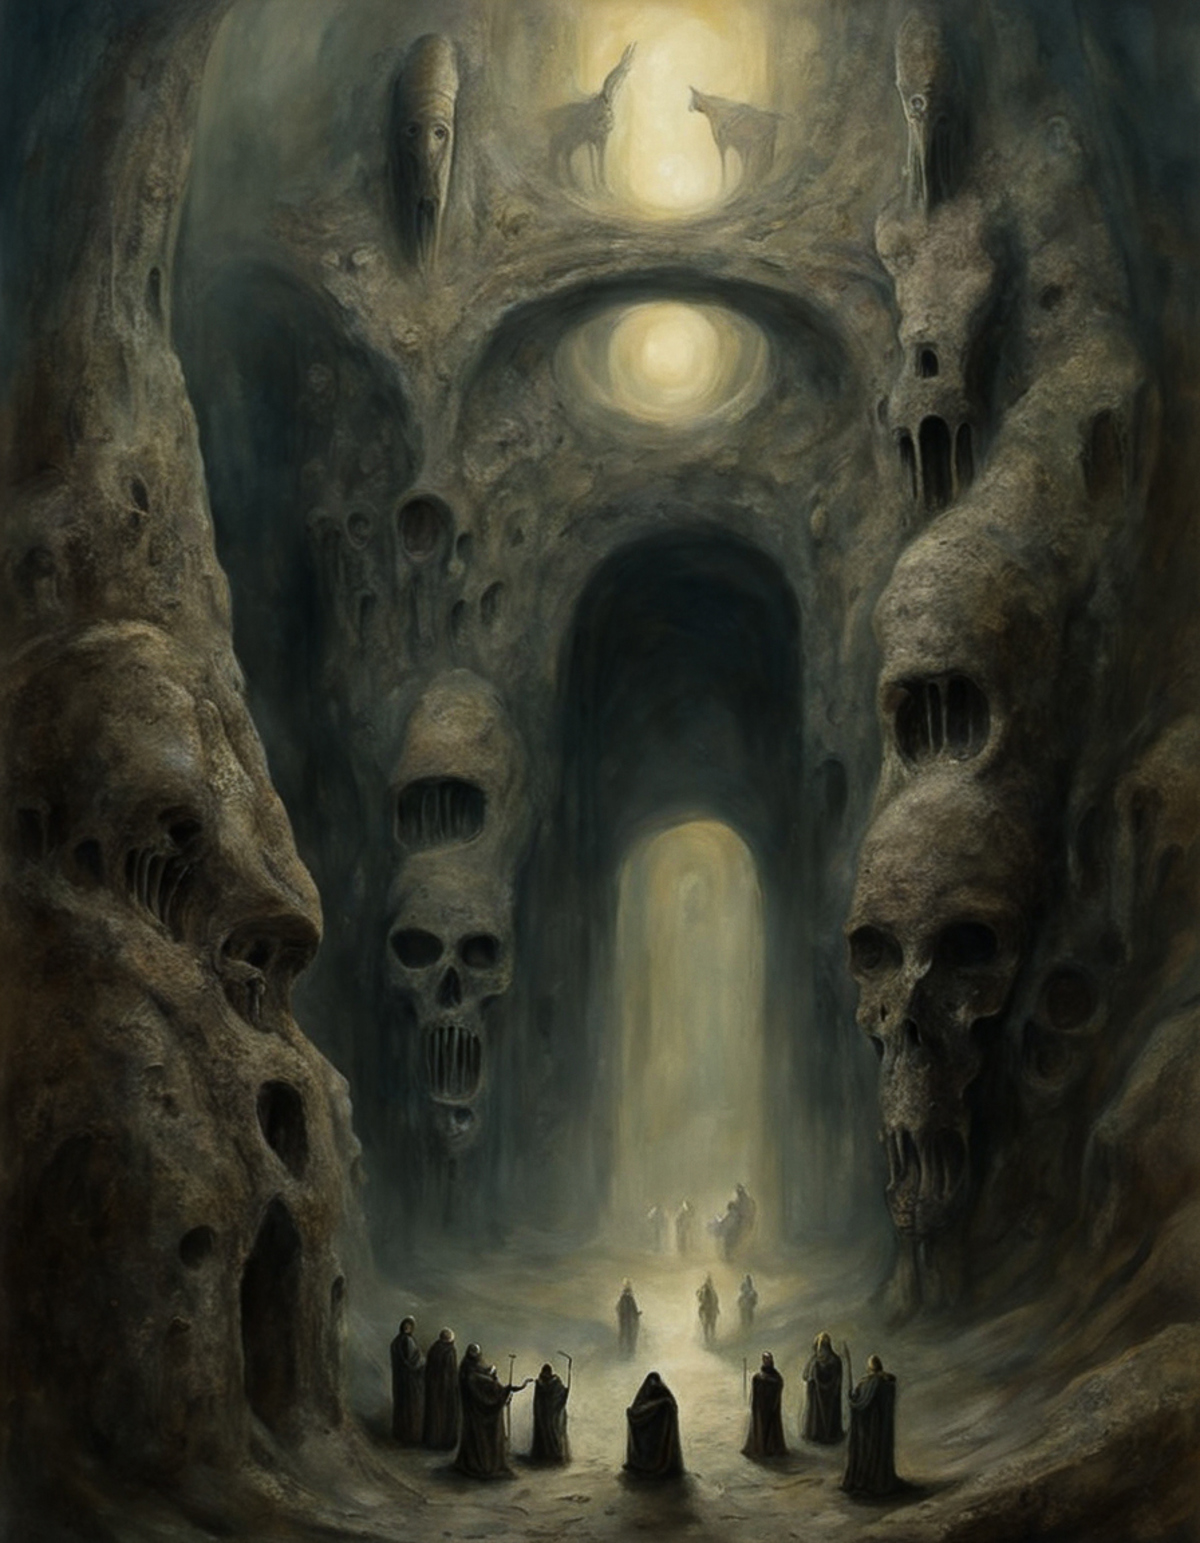 A painting of a cave with skulls on the rock walls and a group of people walking through it.